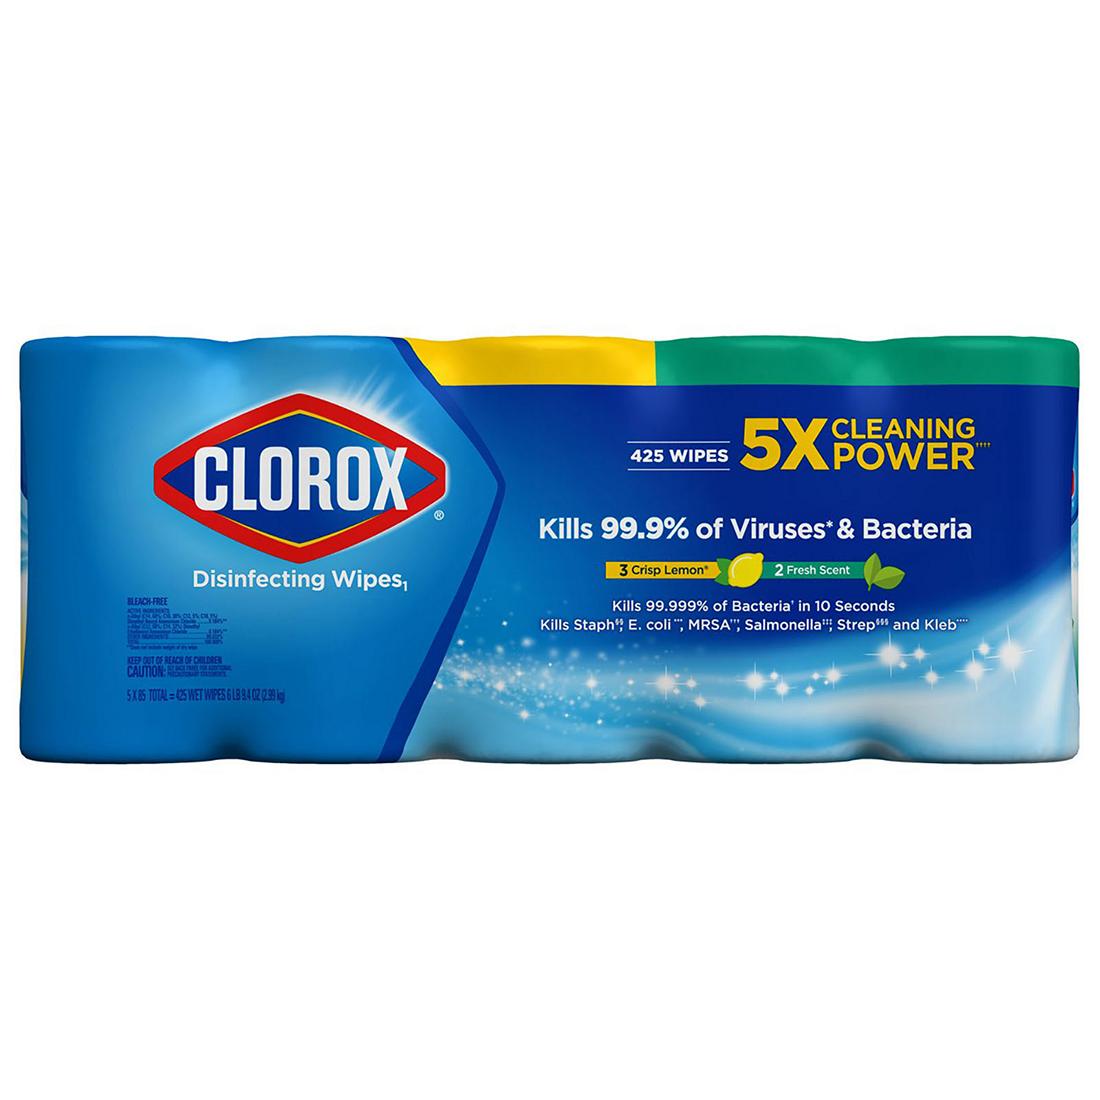 Clorox Disinfecting Wipes Value Pack, 5 Pack